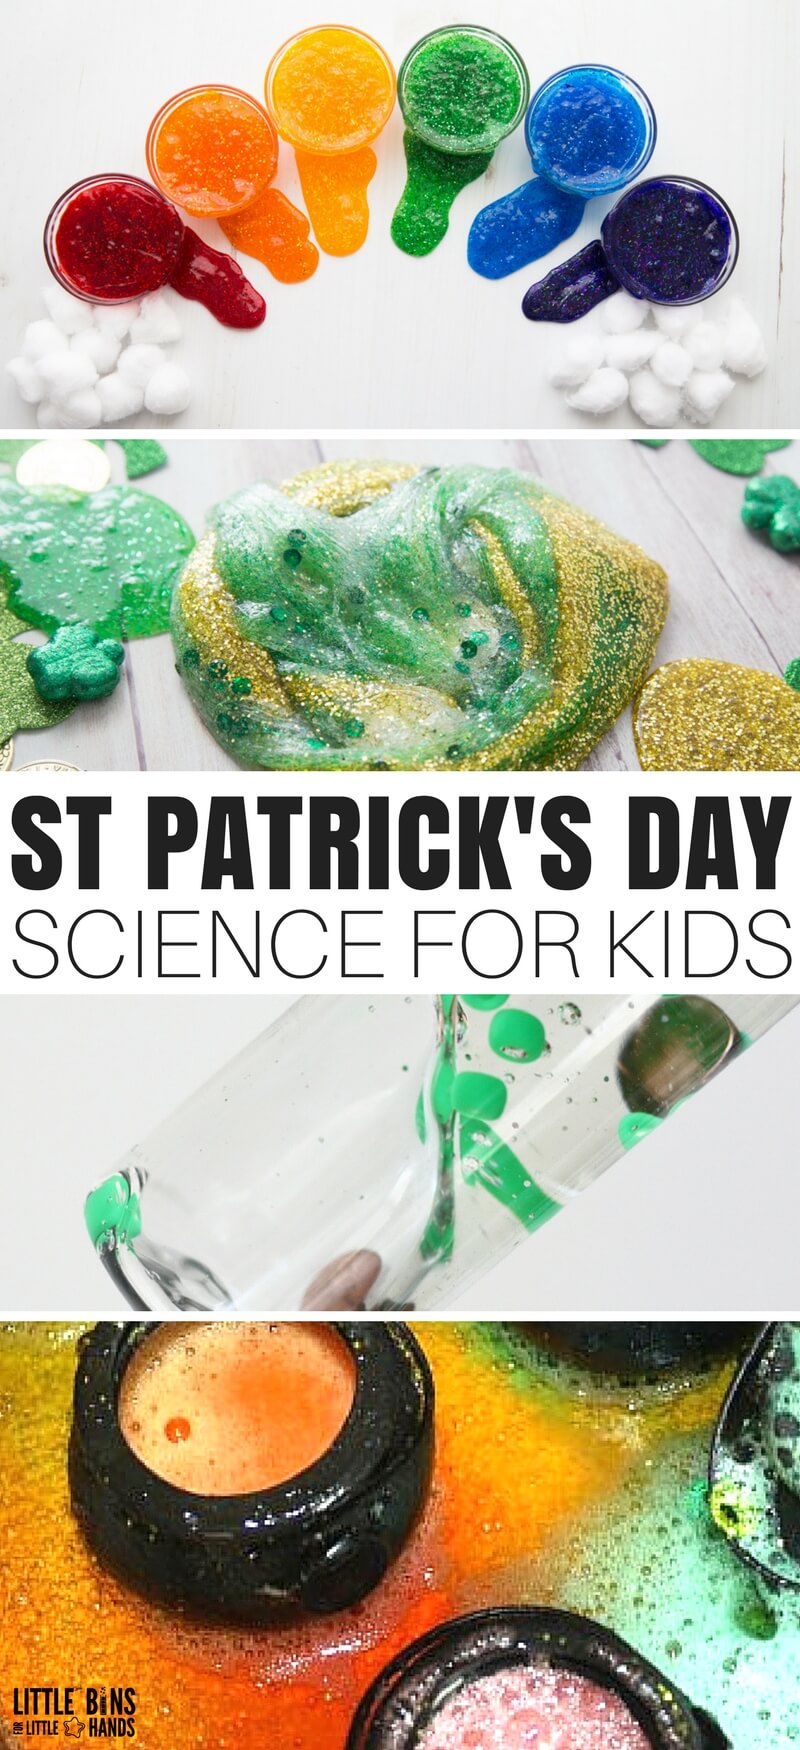 Awesome St Patricks Day Science Activities and STEM Ideas for Kids. Our St patricks Day Science experiments include chemistry and physics with slime making, chemical reactions, dissolving candy, exploring viscosity, growing crystals and so much more! 